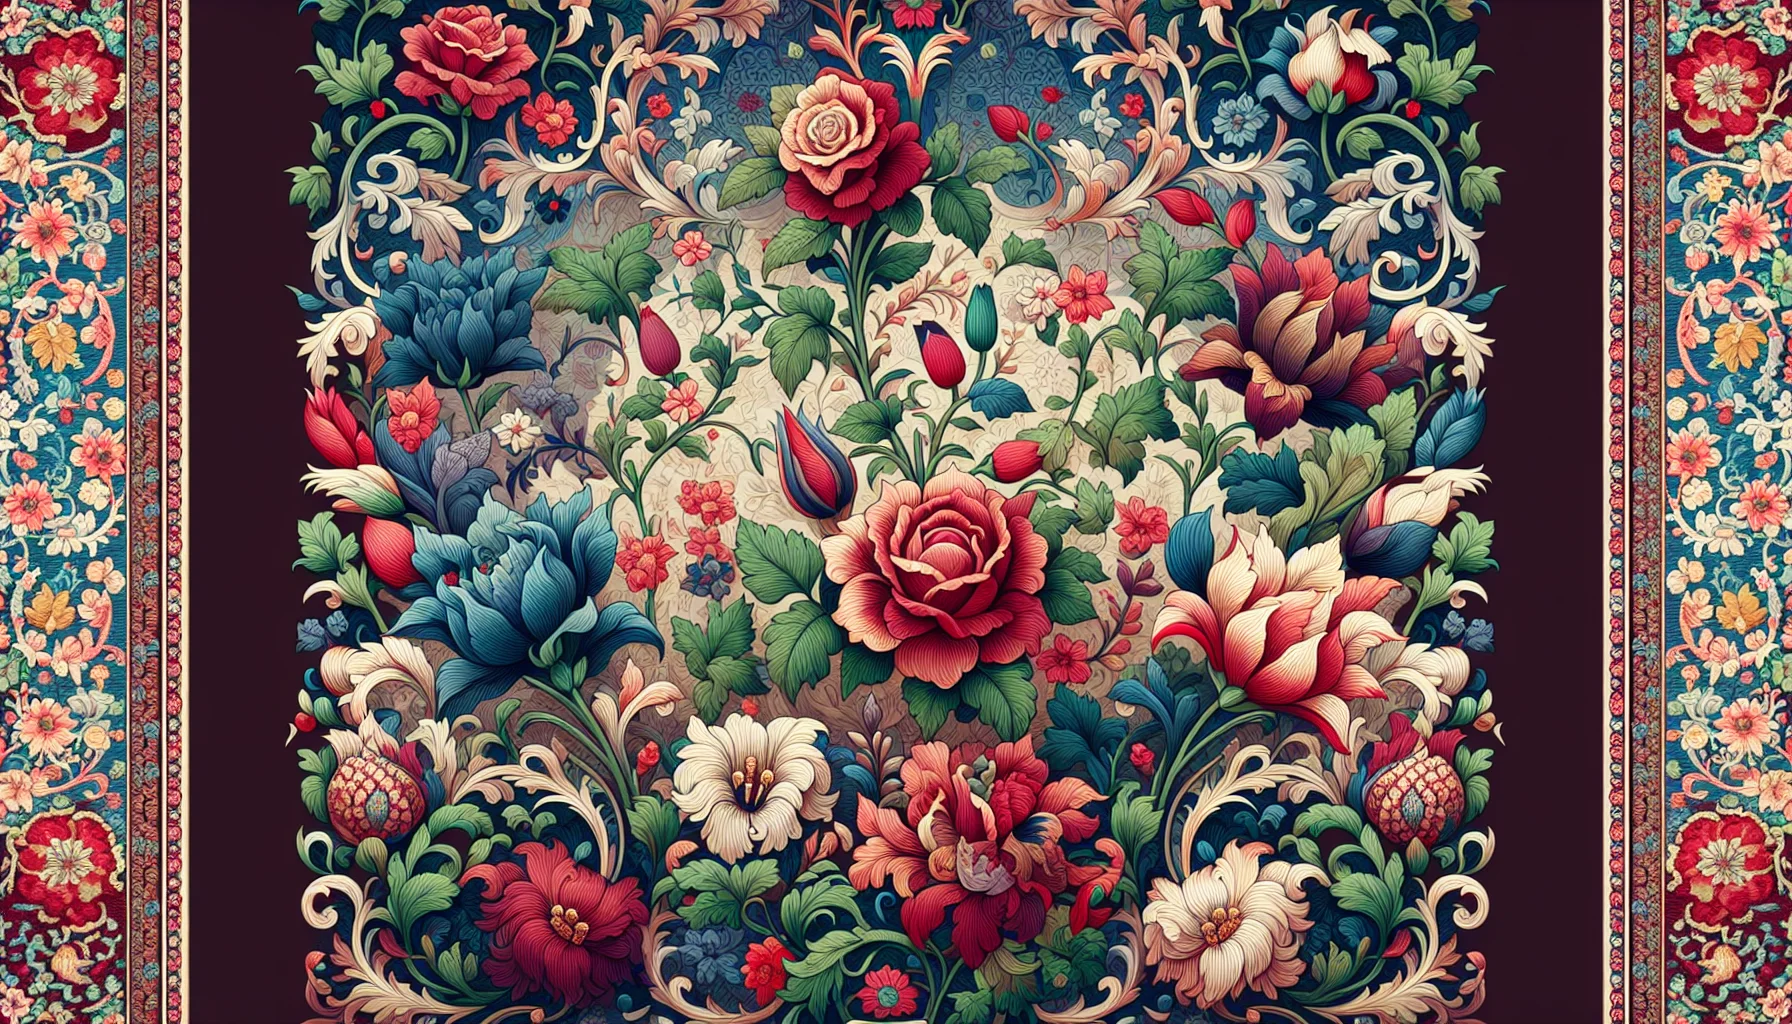 Illustration of intricate floral designs in Persian rugs